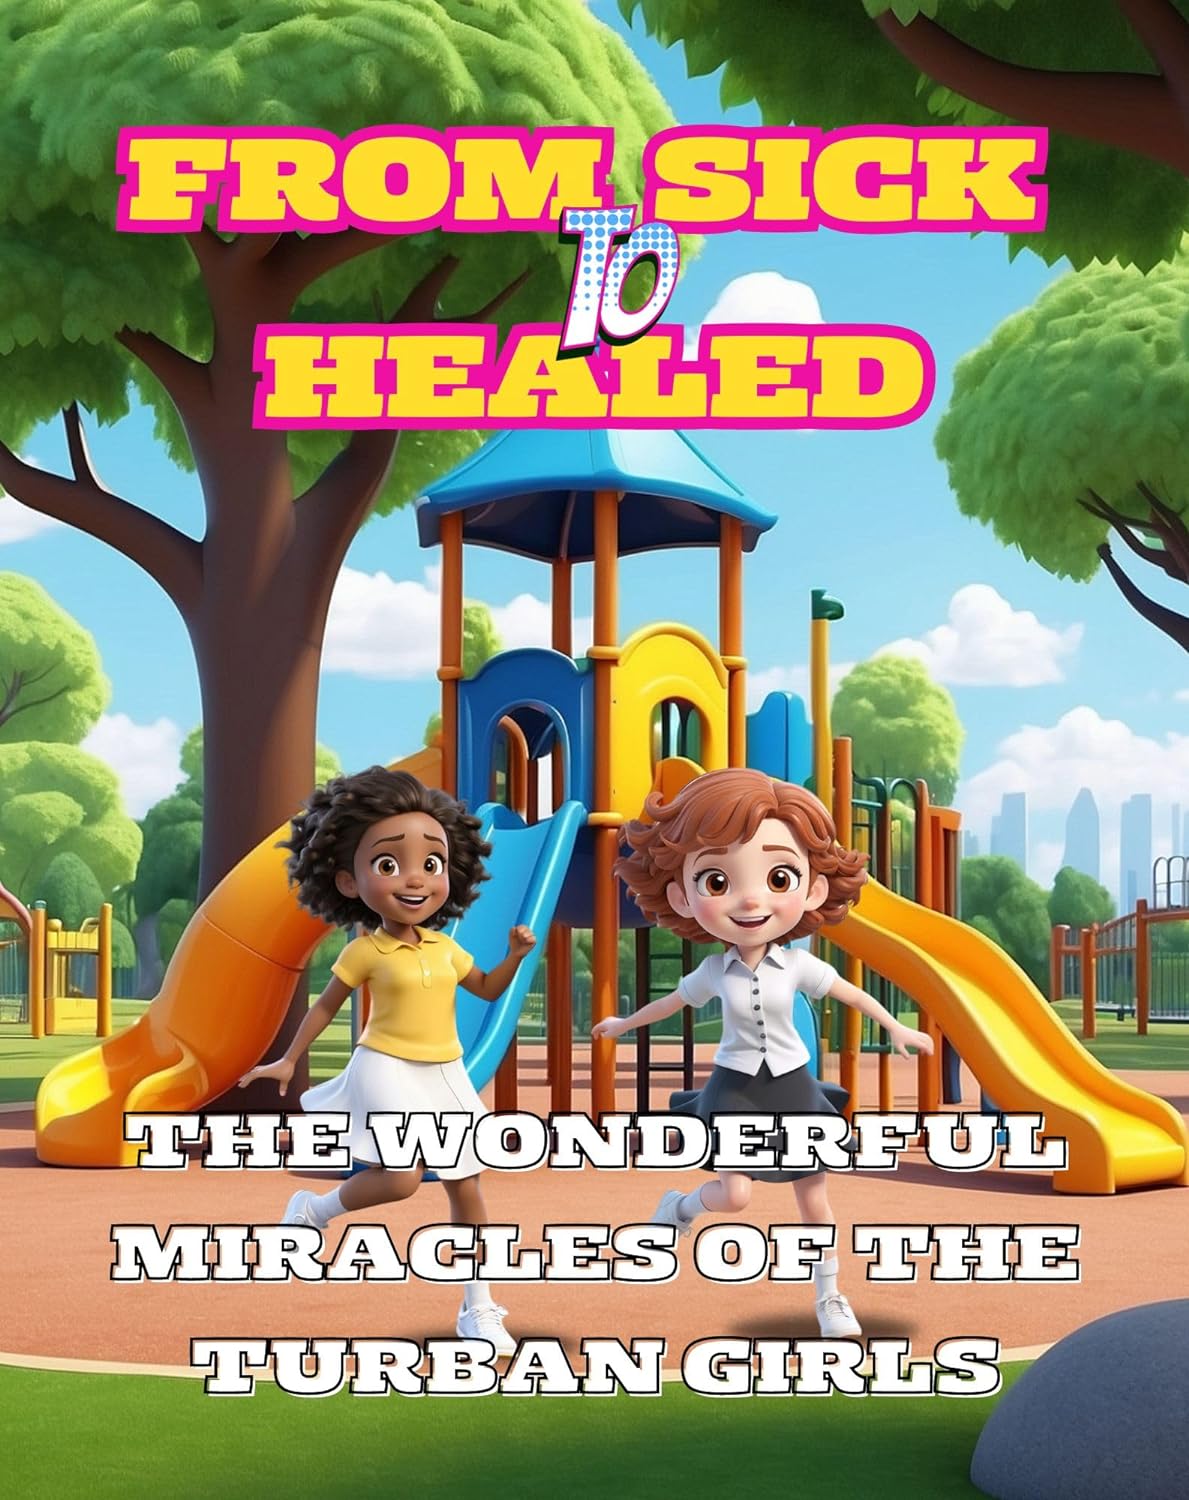 Author Latoya Shea Unveils a Heartwarming Tale of Faith, Friendship, and Miraculous Healing in New Children's Book - From Sick to Healed